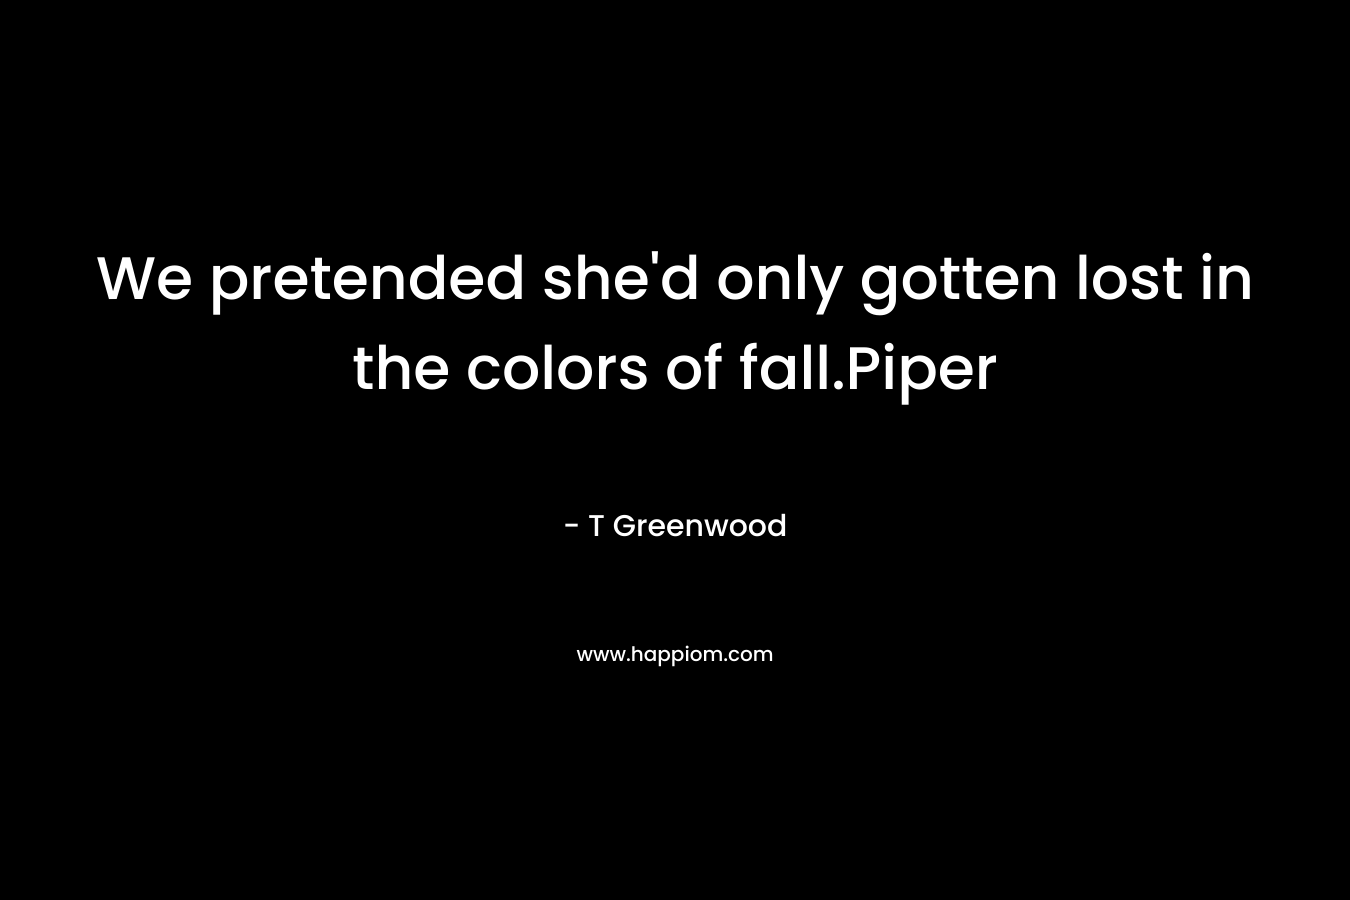 We pretended she’d only gotten lost in the colors of fall.Piper – T Greenwood